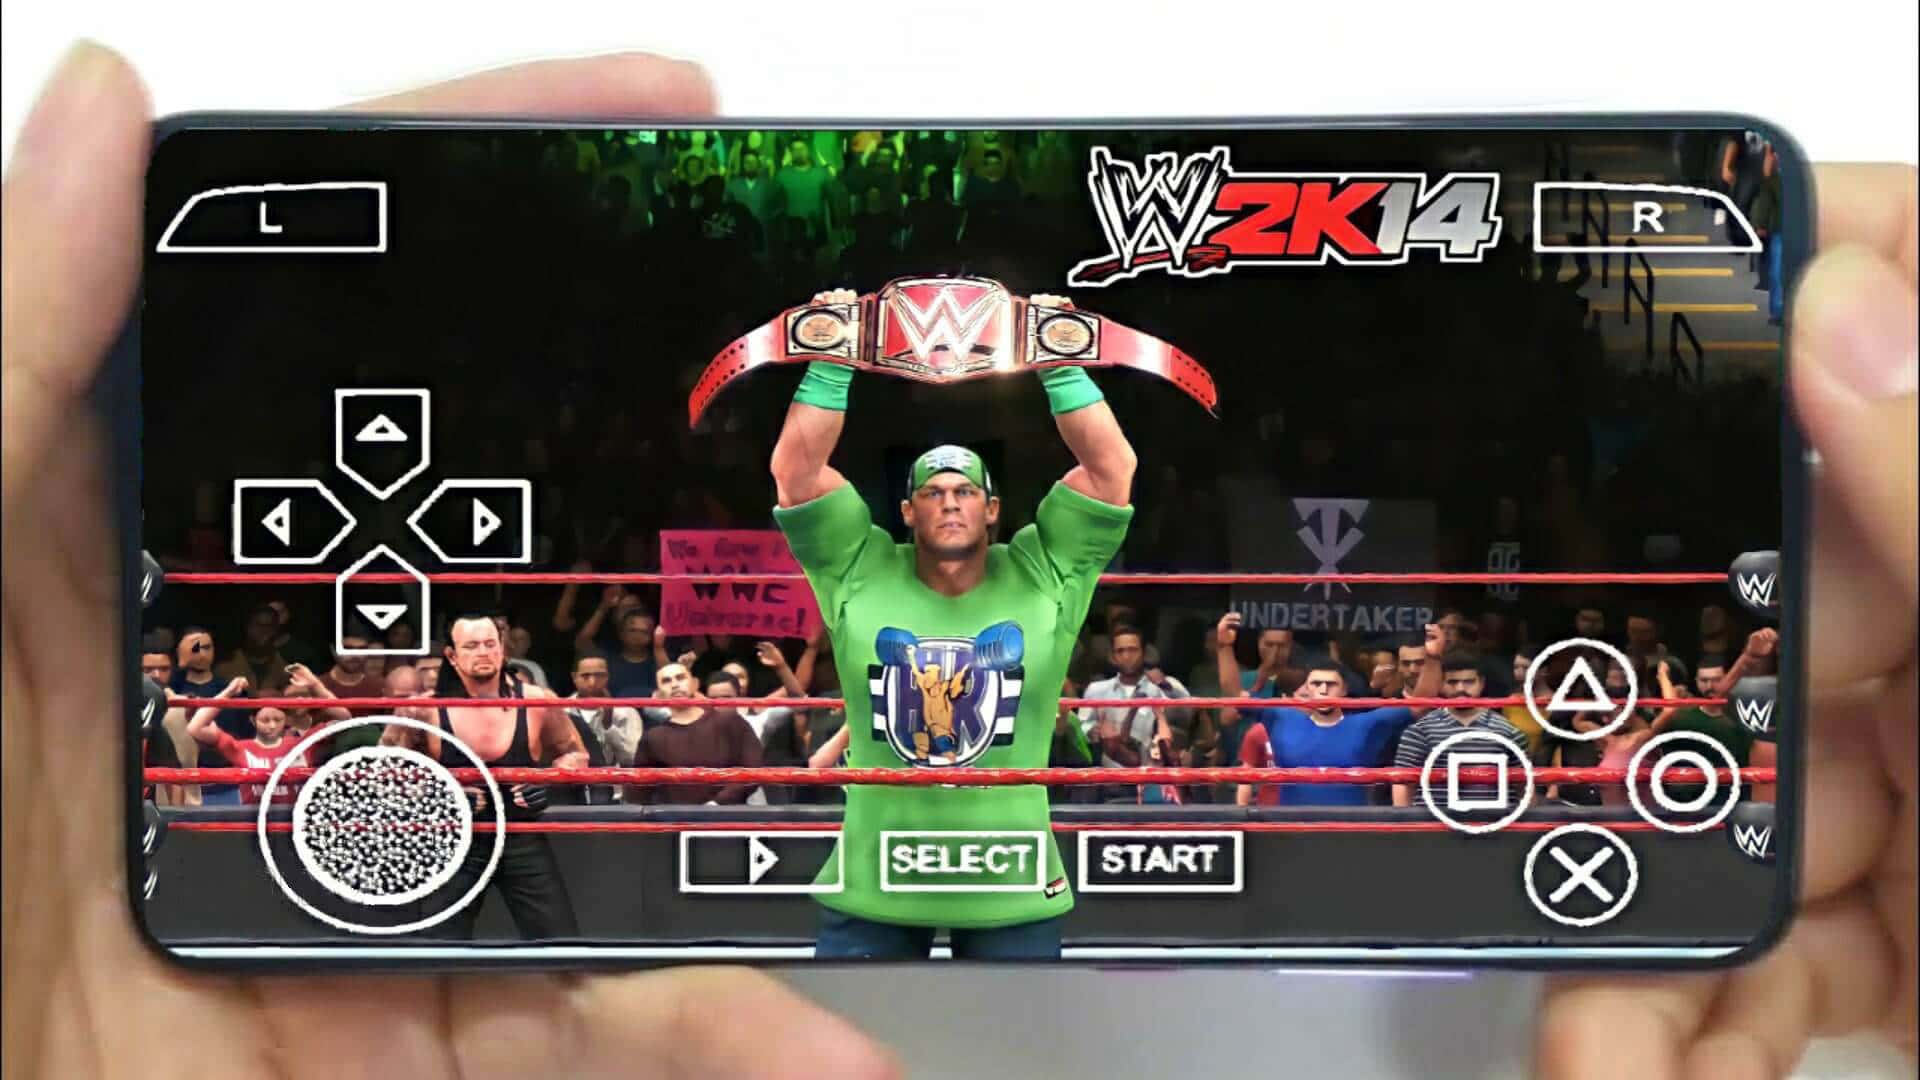 WWE 2K14 iSO PPSSPP 2021 Download for Android